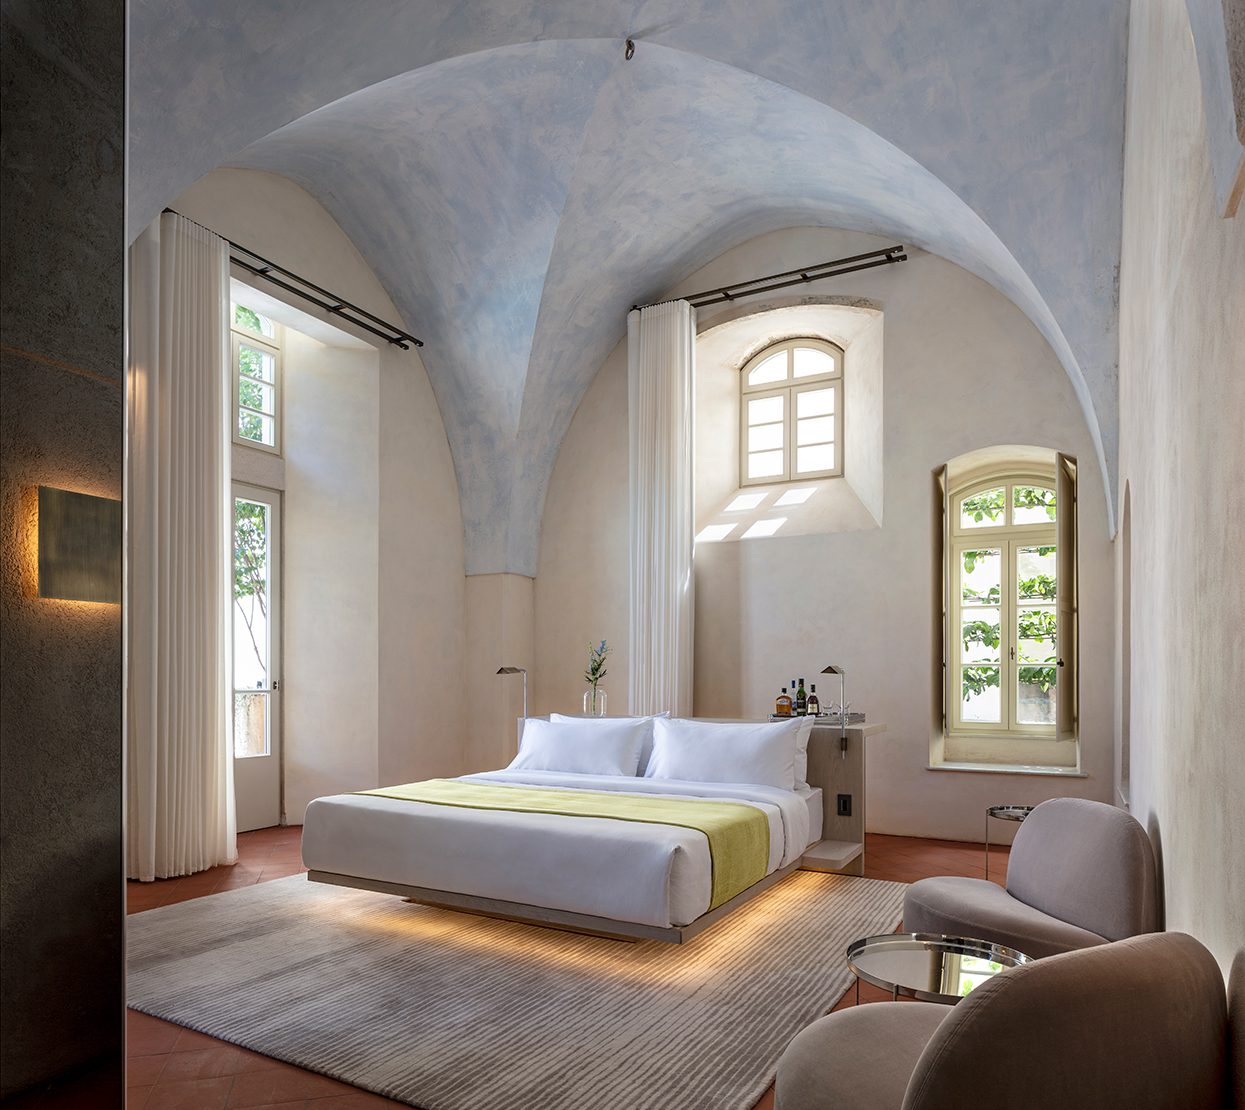 Deluxe Junior Suites have arched ceilings and lots of sunlight by Amit Geron